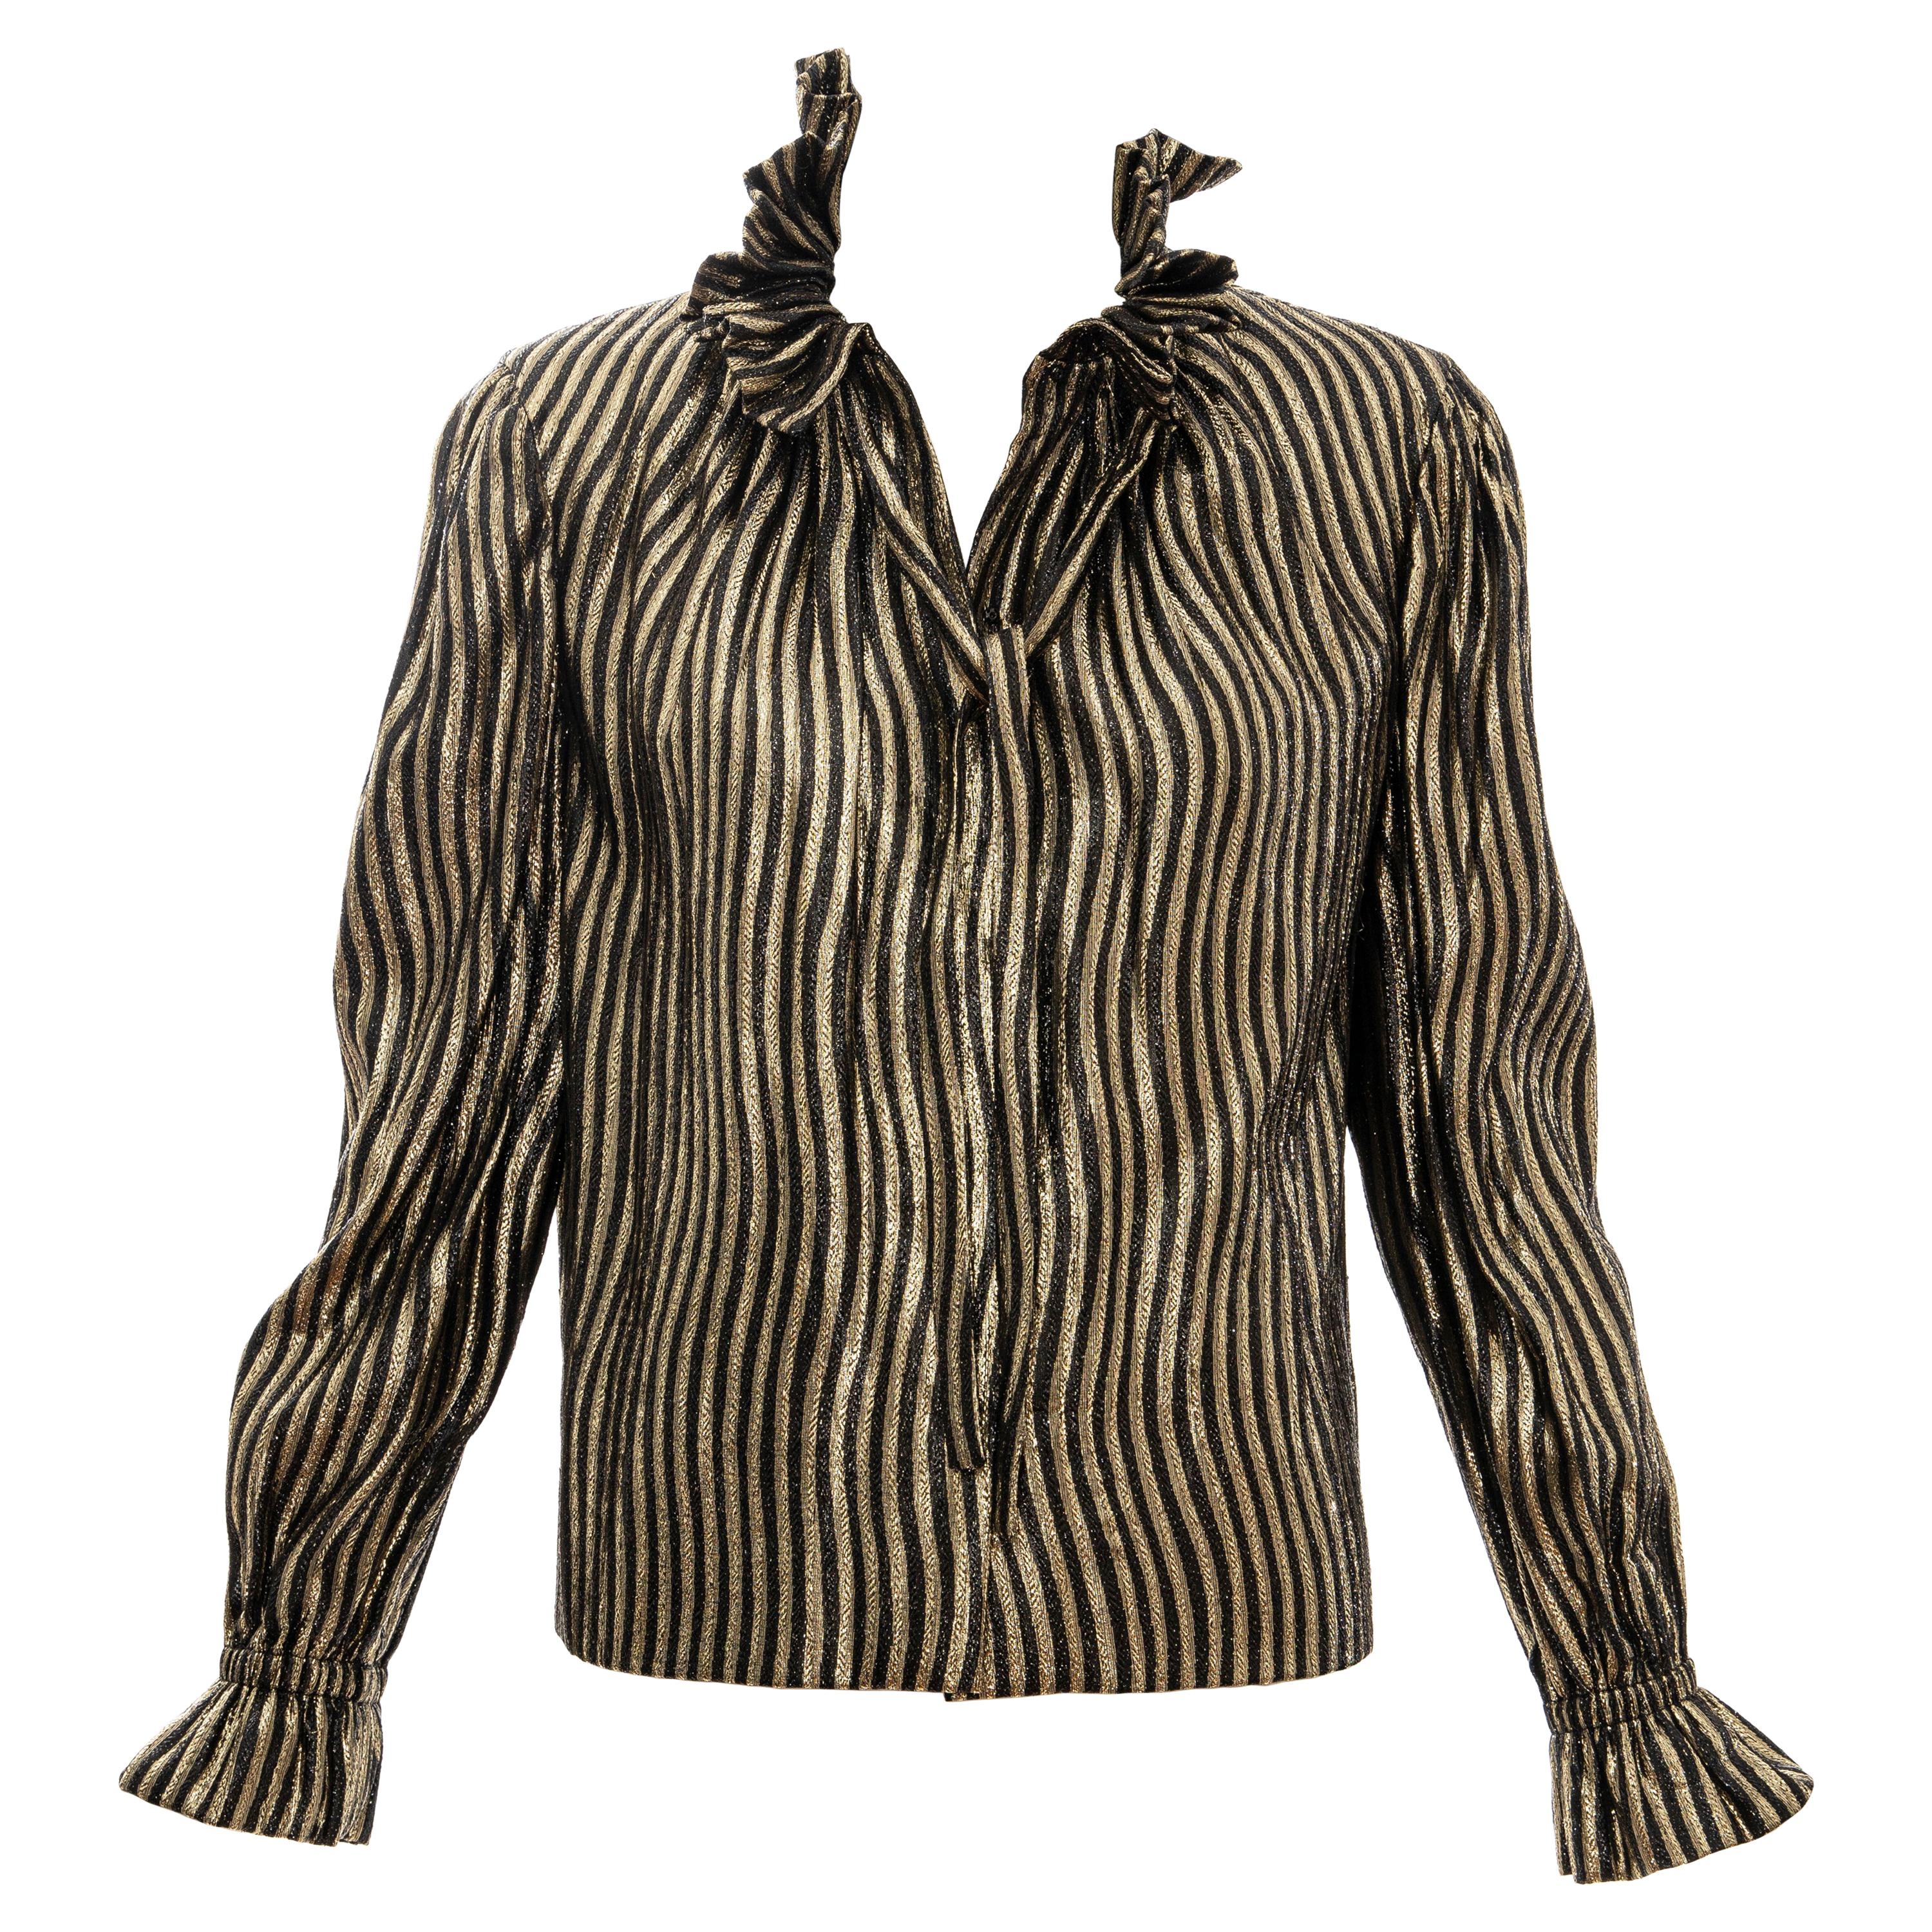 Pauline Trigere Black Gold Striped Metallic Snap Front Blouse, Circa: 1970's For Sale